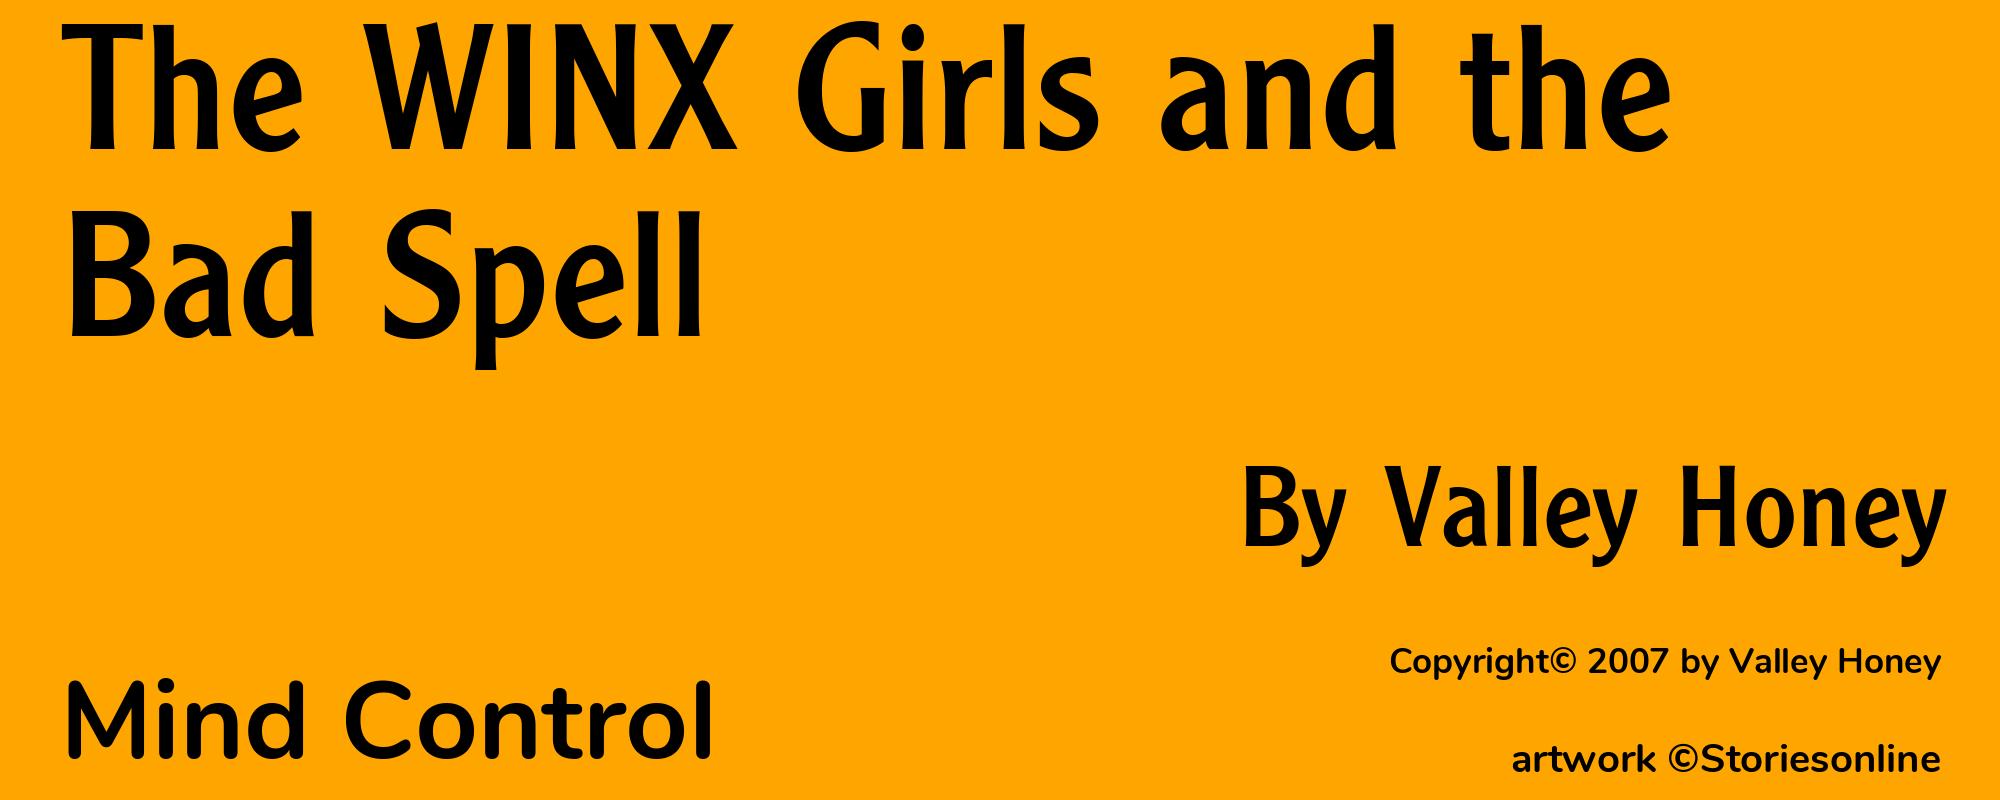 The WINX Girls and the Bad Spell - Cover